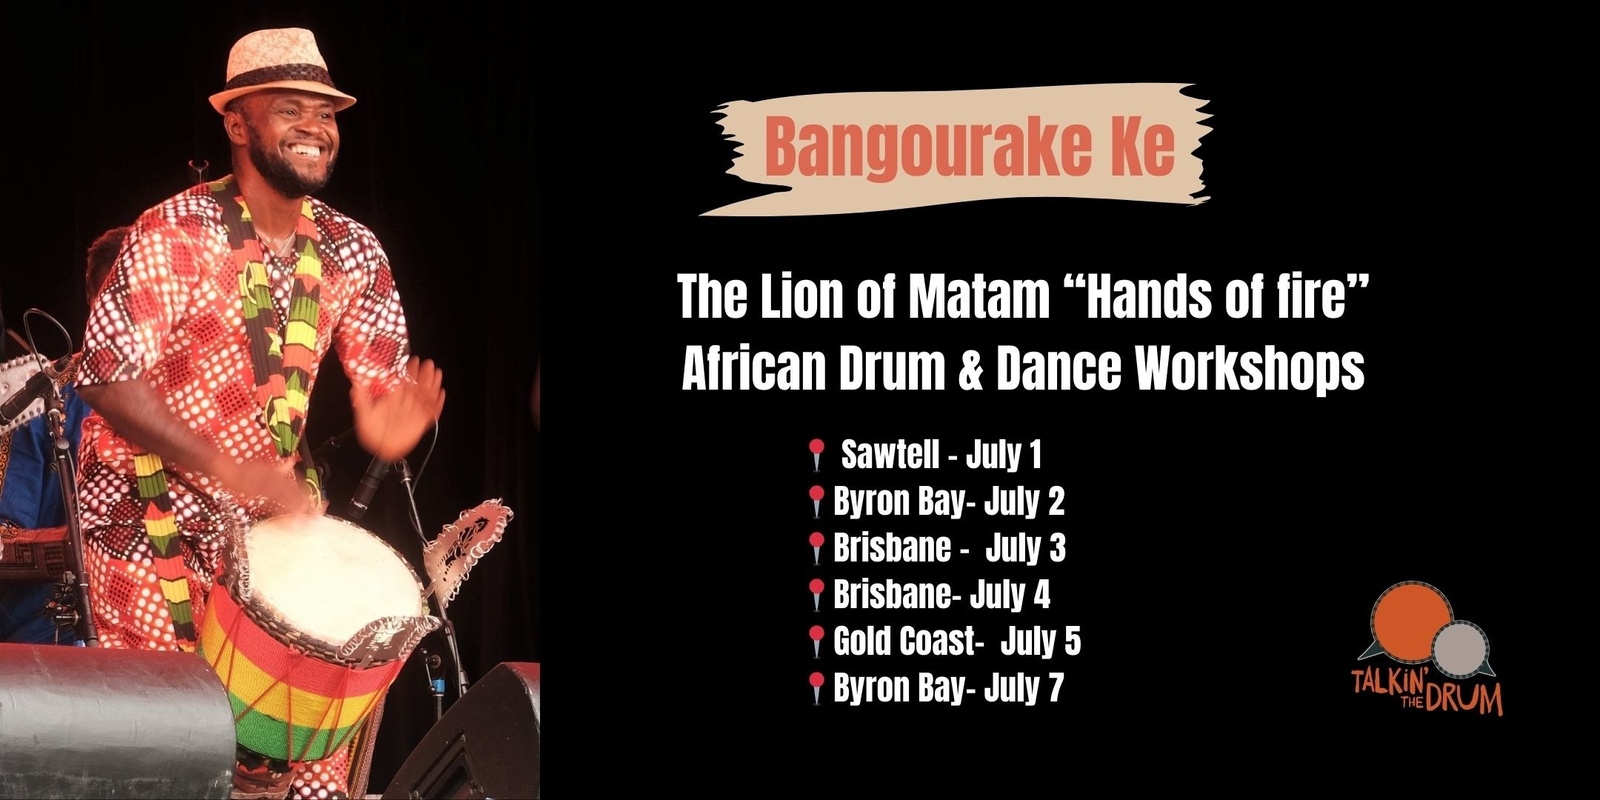 Banner image for African Drum and Dance Workshops with Bangoura Ke